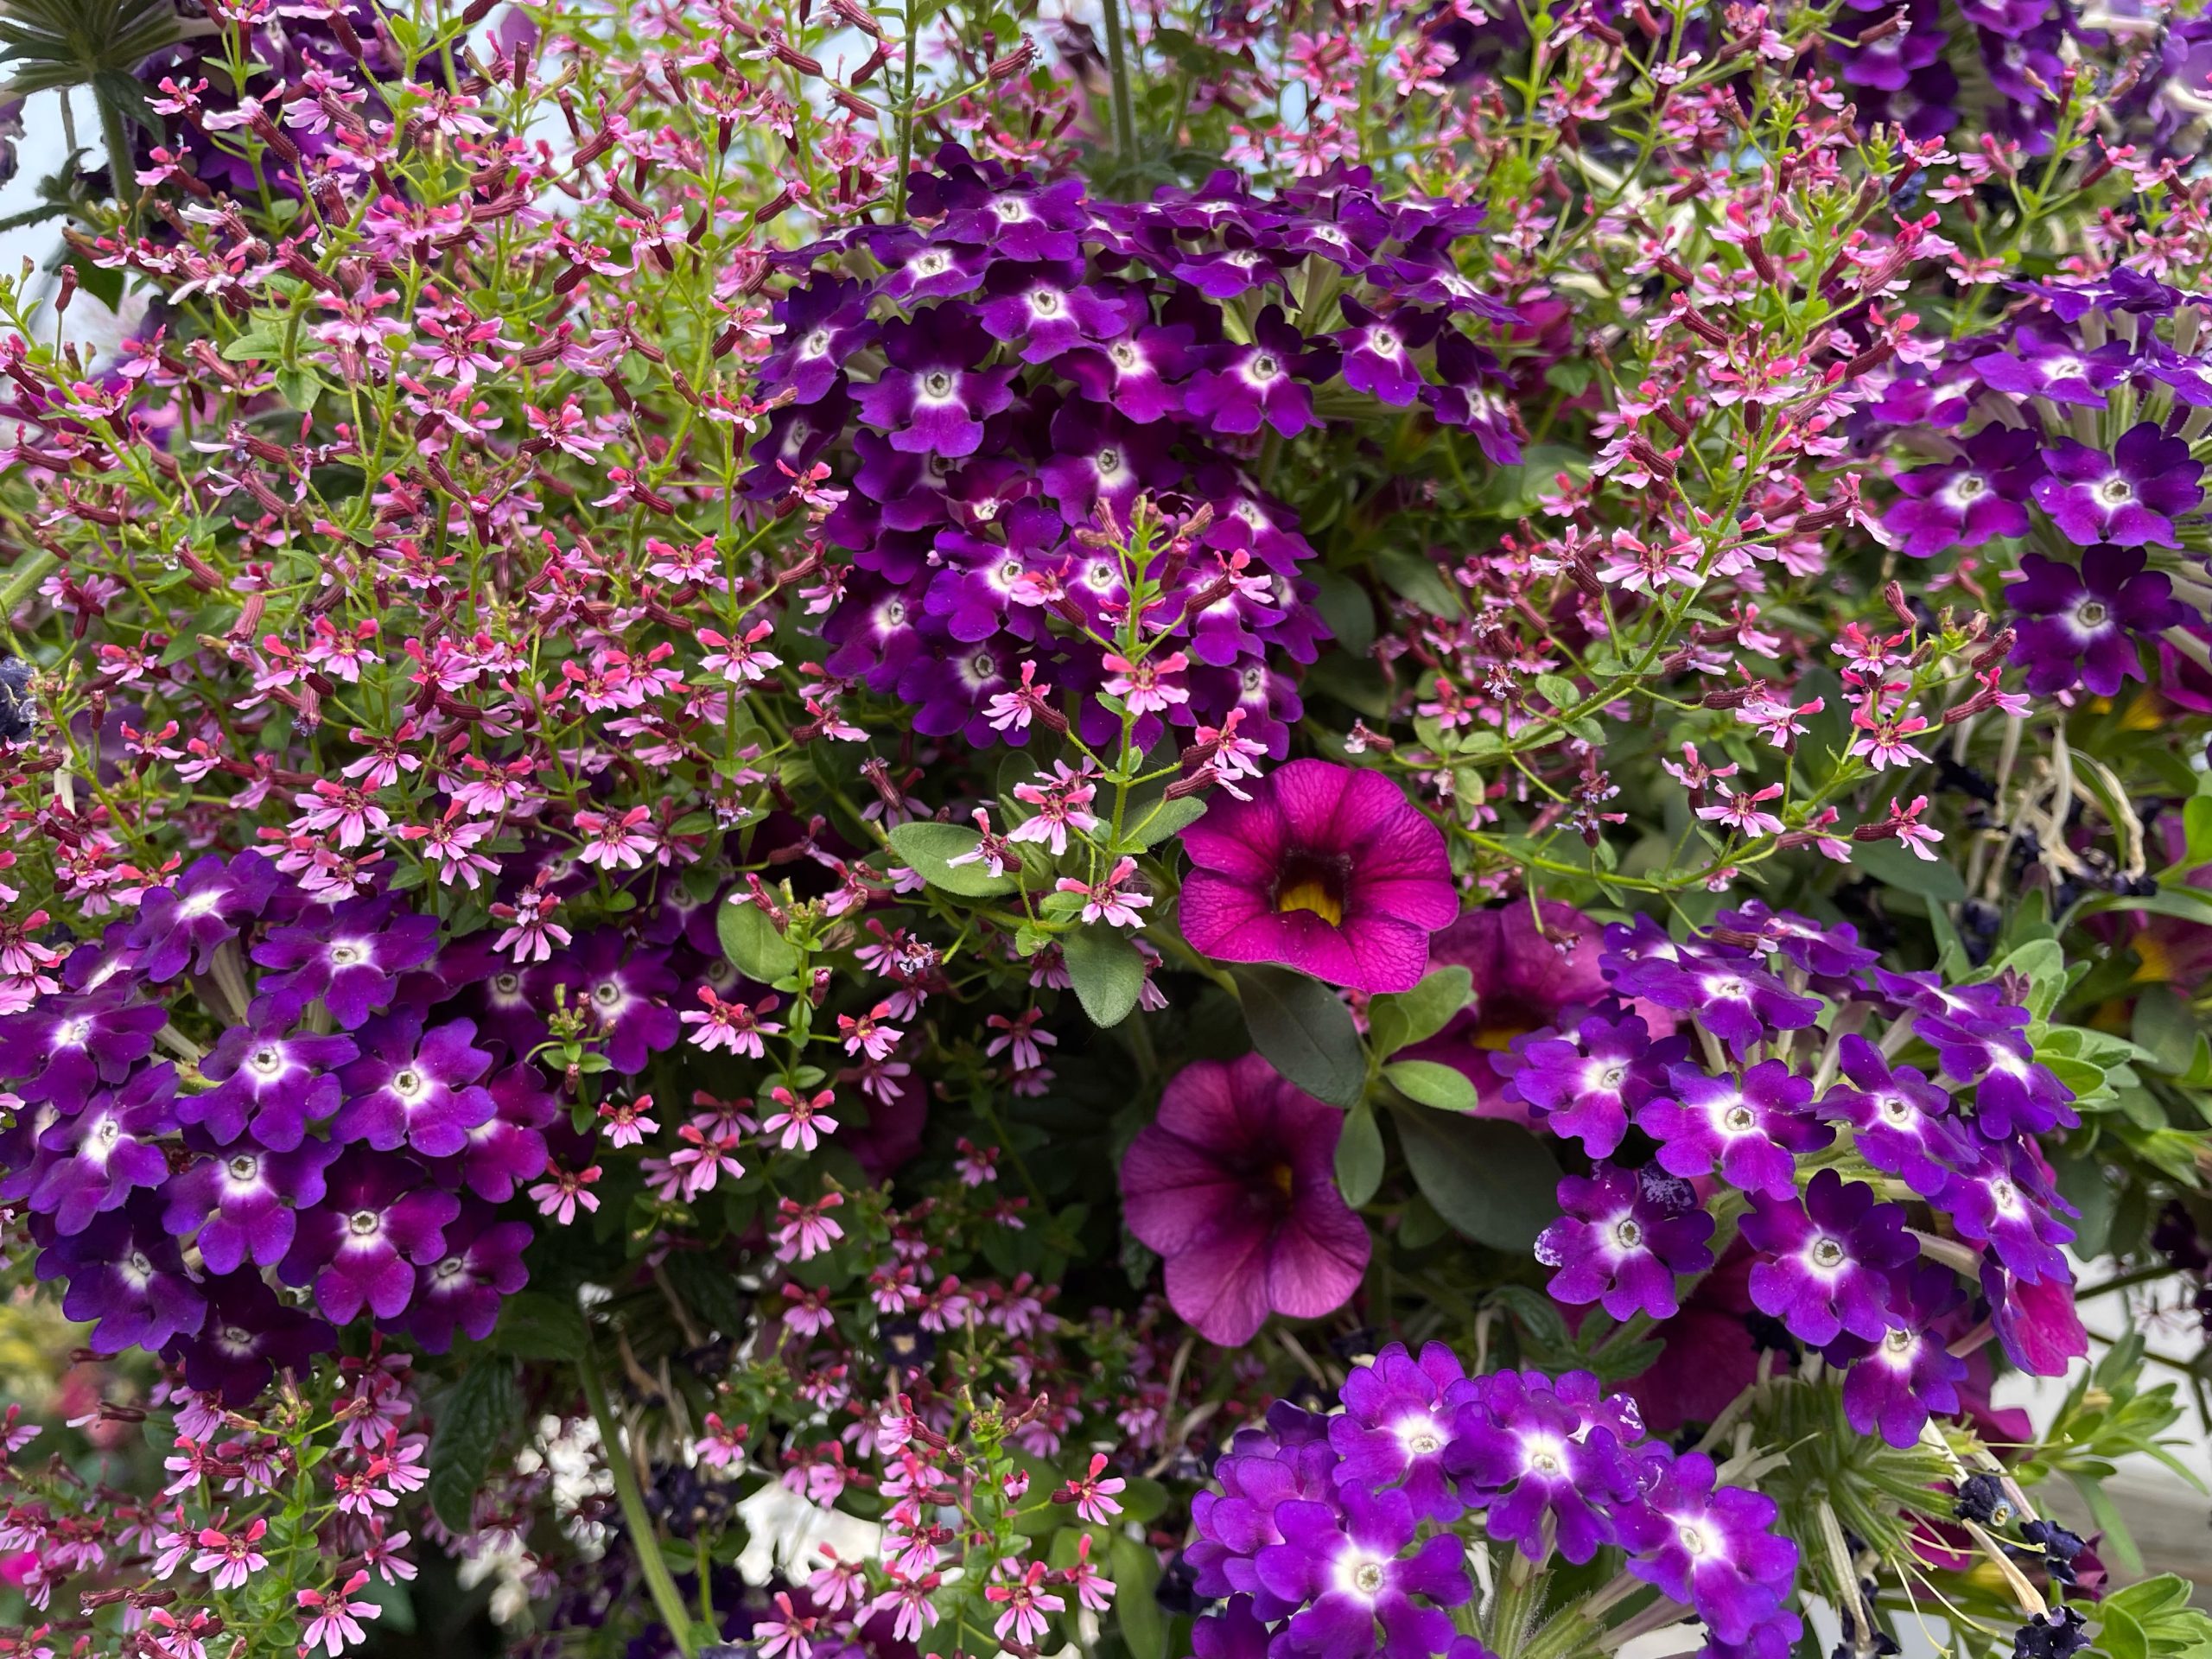 Hanging basket full of greenery, bright purple flower clusters, pink flowers, and magenta flowers.